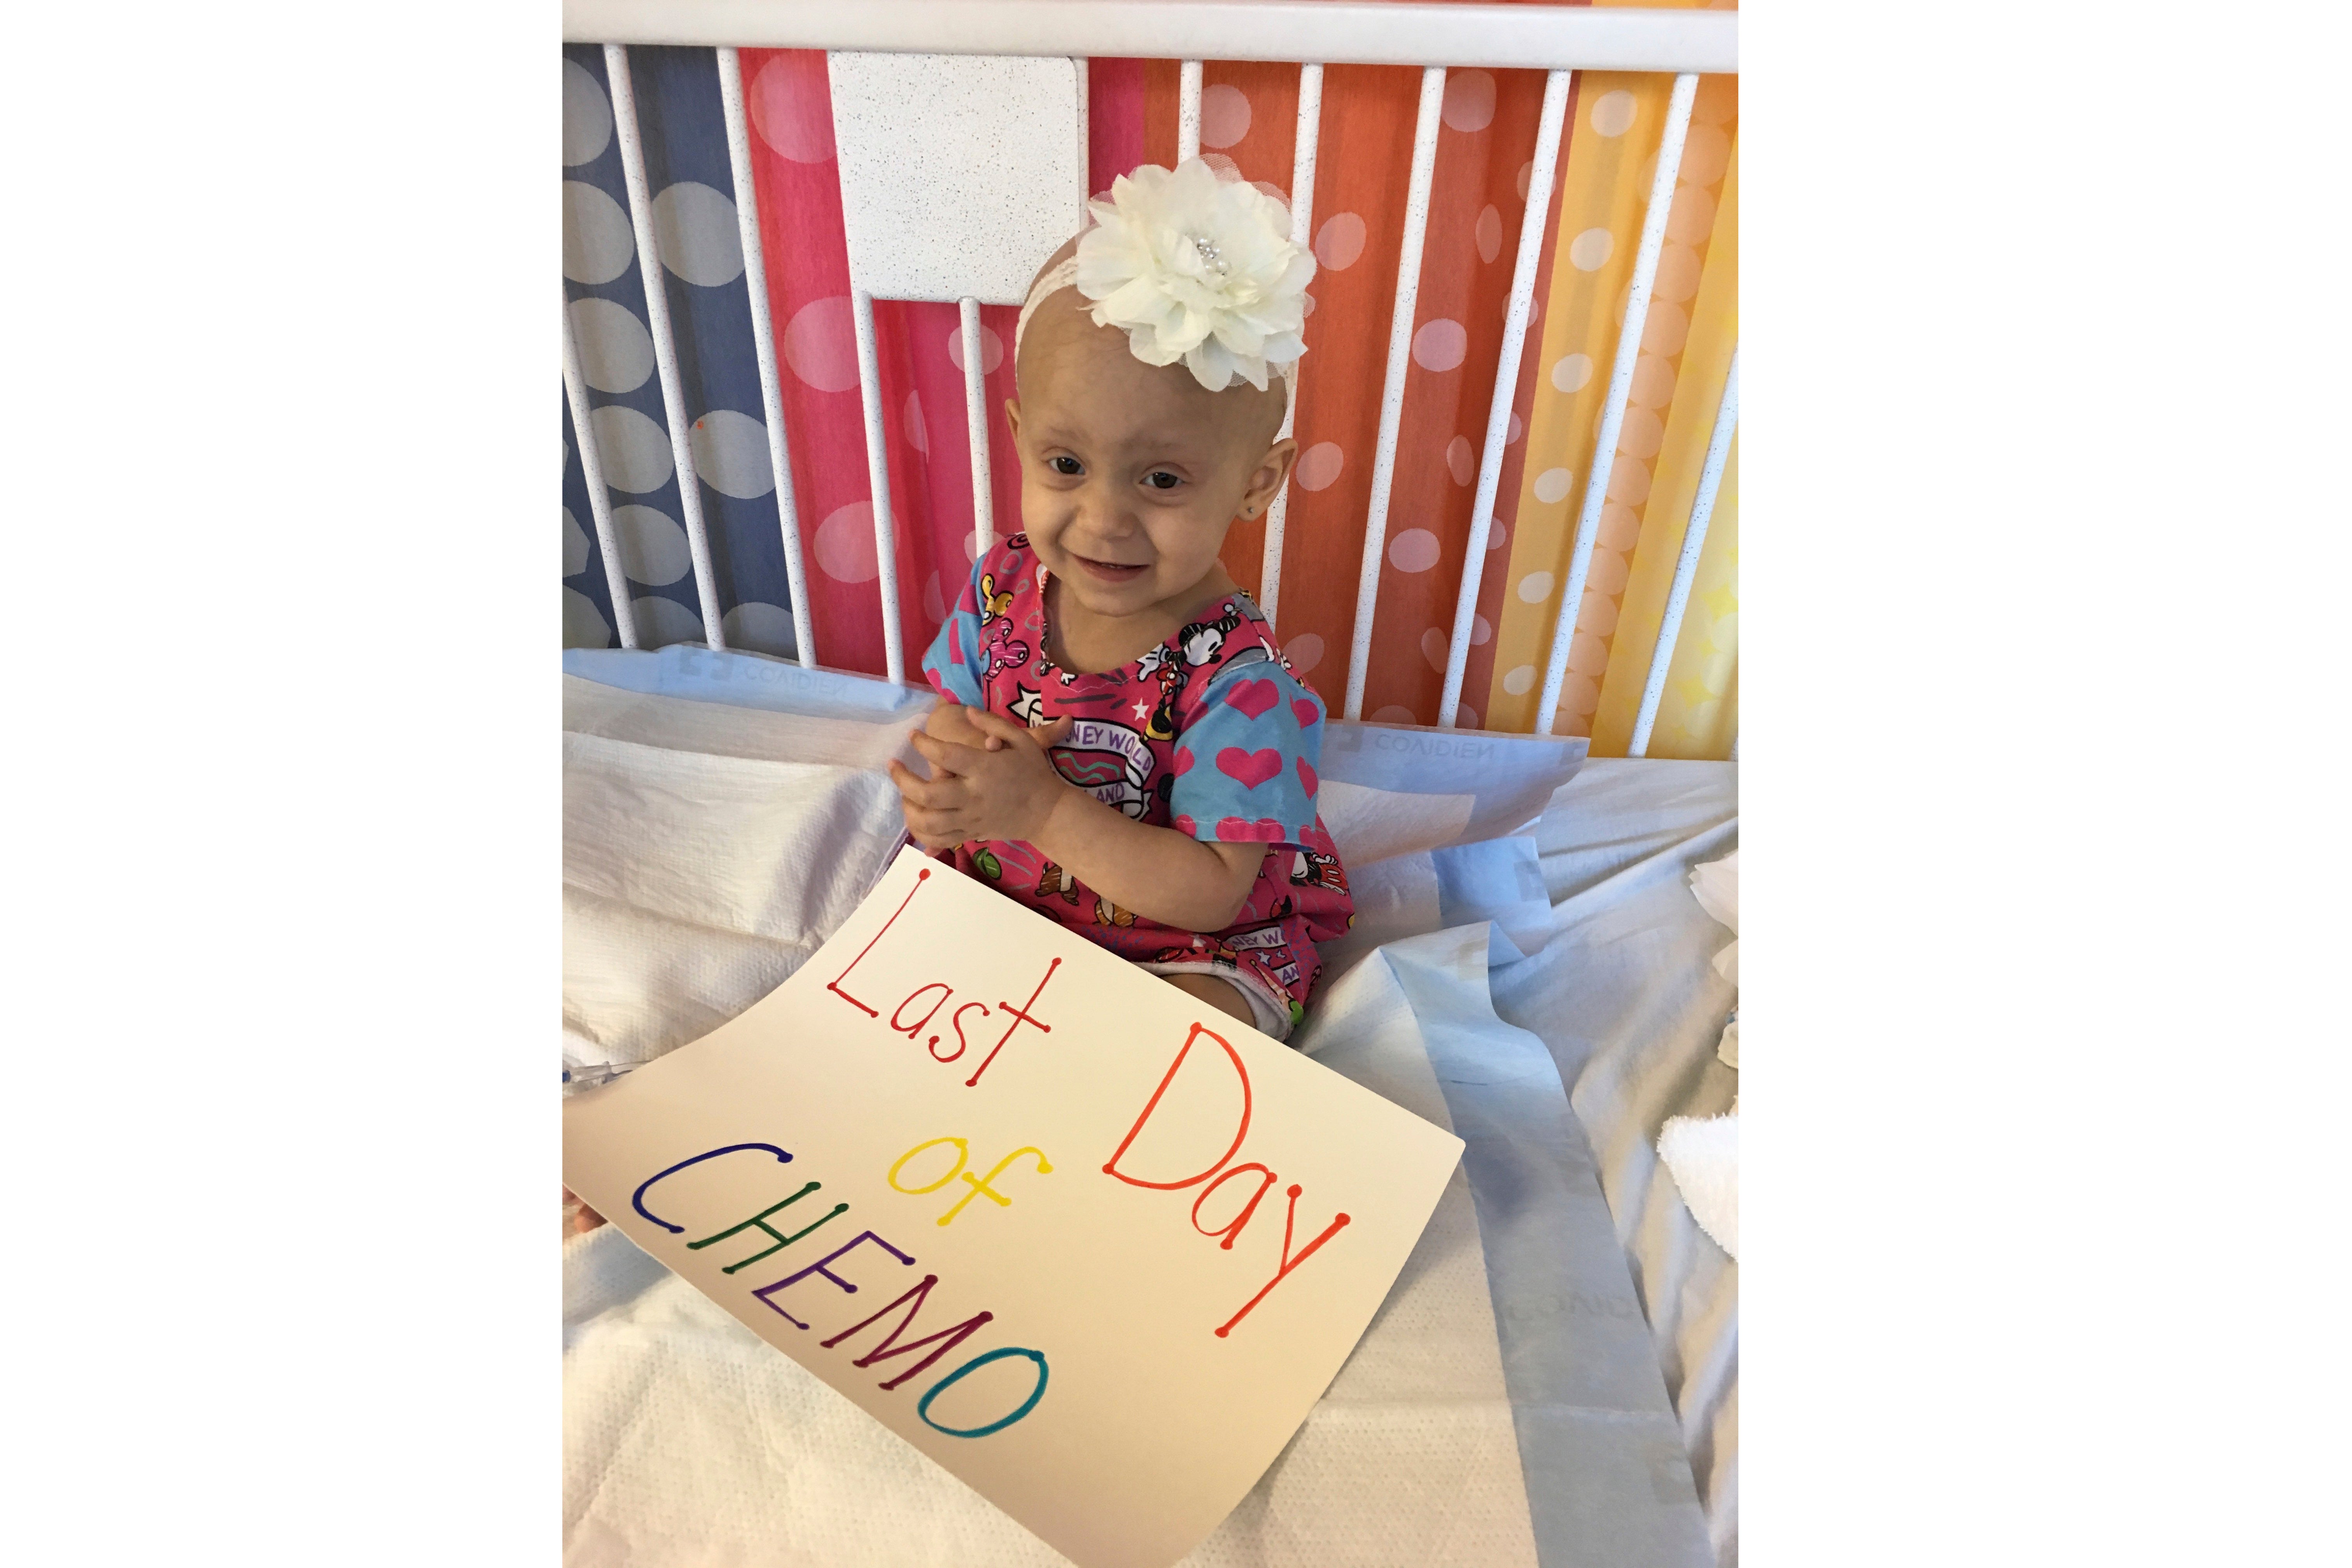 Giada Demma, 1-year-old, sits in a pediatric hospital bed at NYU Langone Medical Center in New York on Oct. 17, 2017, the last day she was scheduled to undergo chemotherapy for cancer. Her family had a seamstress make the Disney hospital gown Giada is wearing. But seeing the child wearing a drab hospital issued-gown on a different date helped inspired Giada’s cousin Guiliana Demma to learn to sew and make brightly colored, kid-themed hospital gowns for hospitalized children